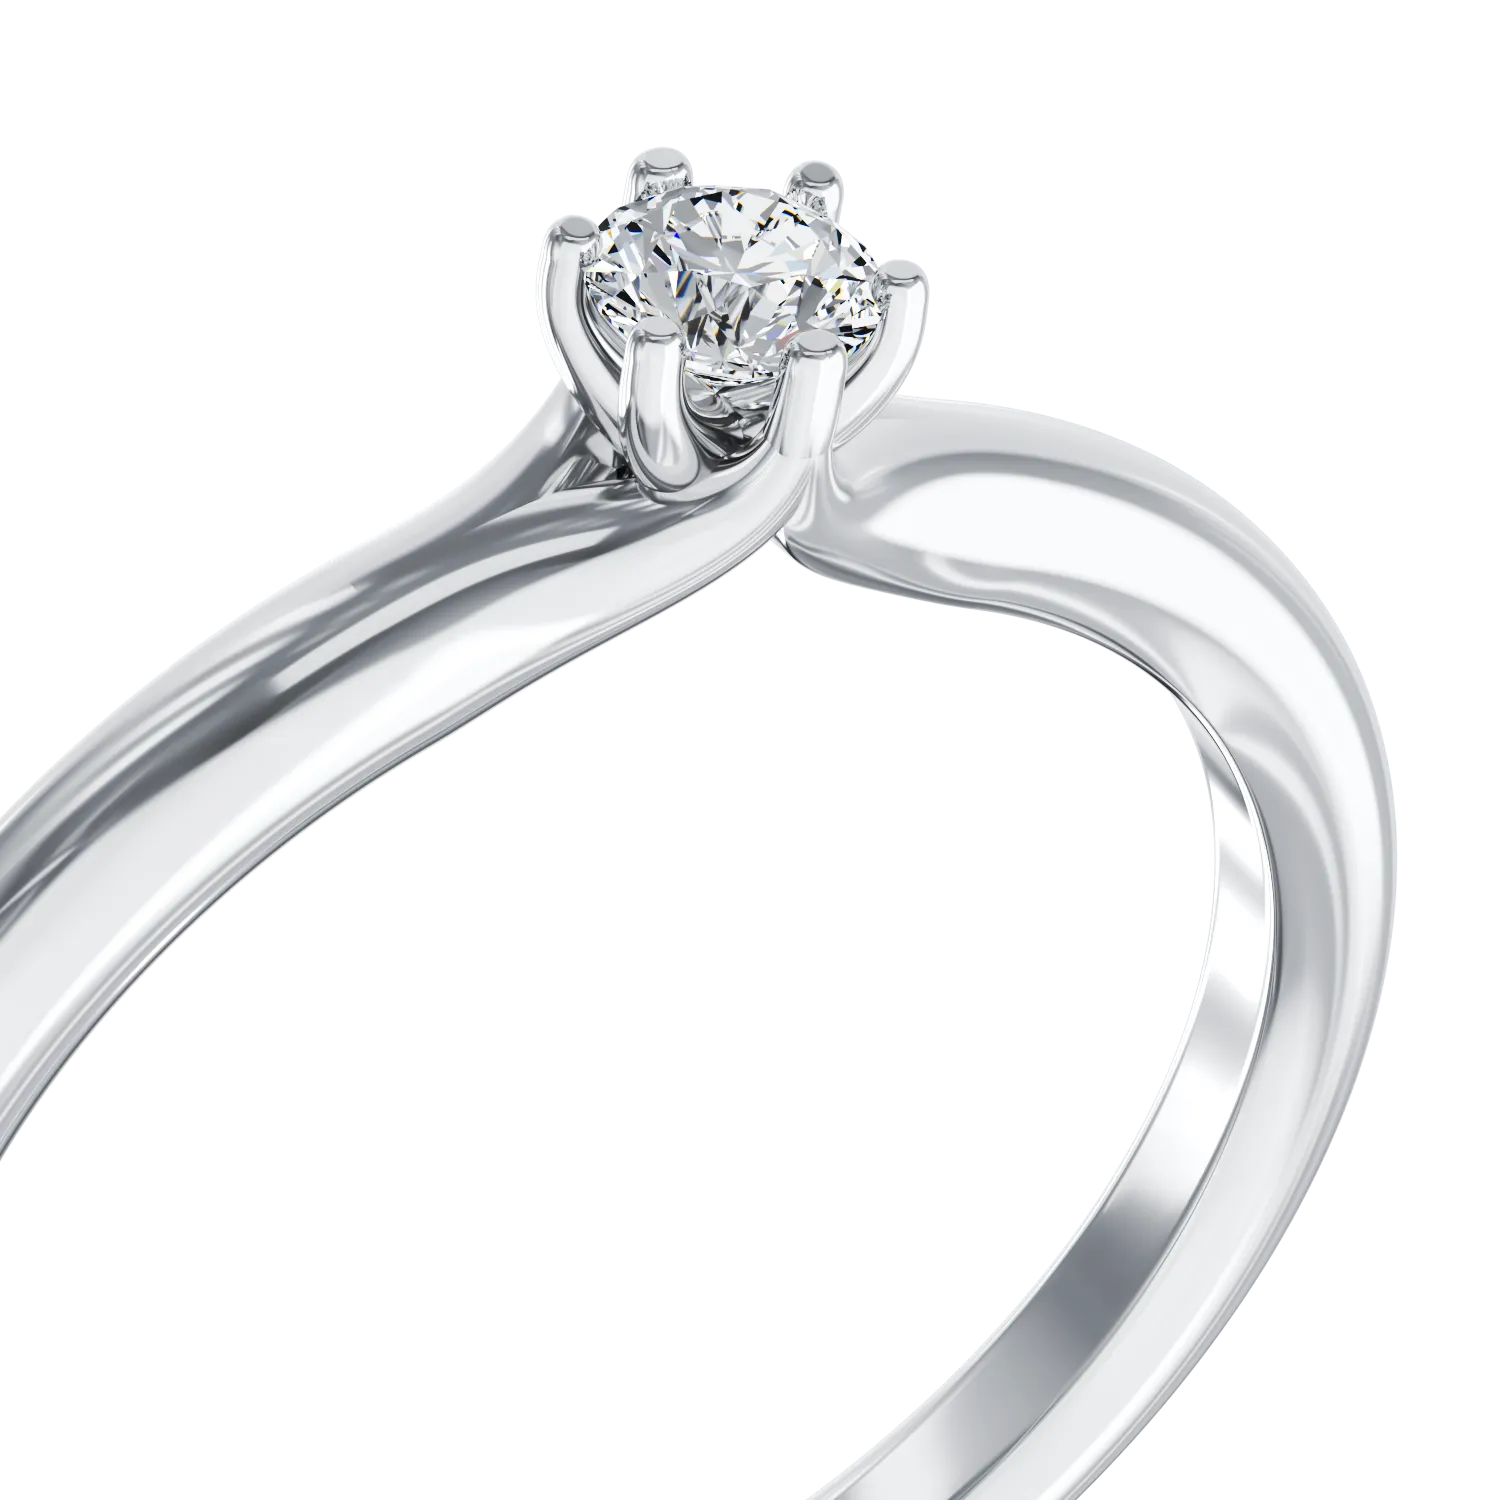 White gold engagement ring with 0.15ct solitaire diamond